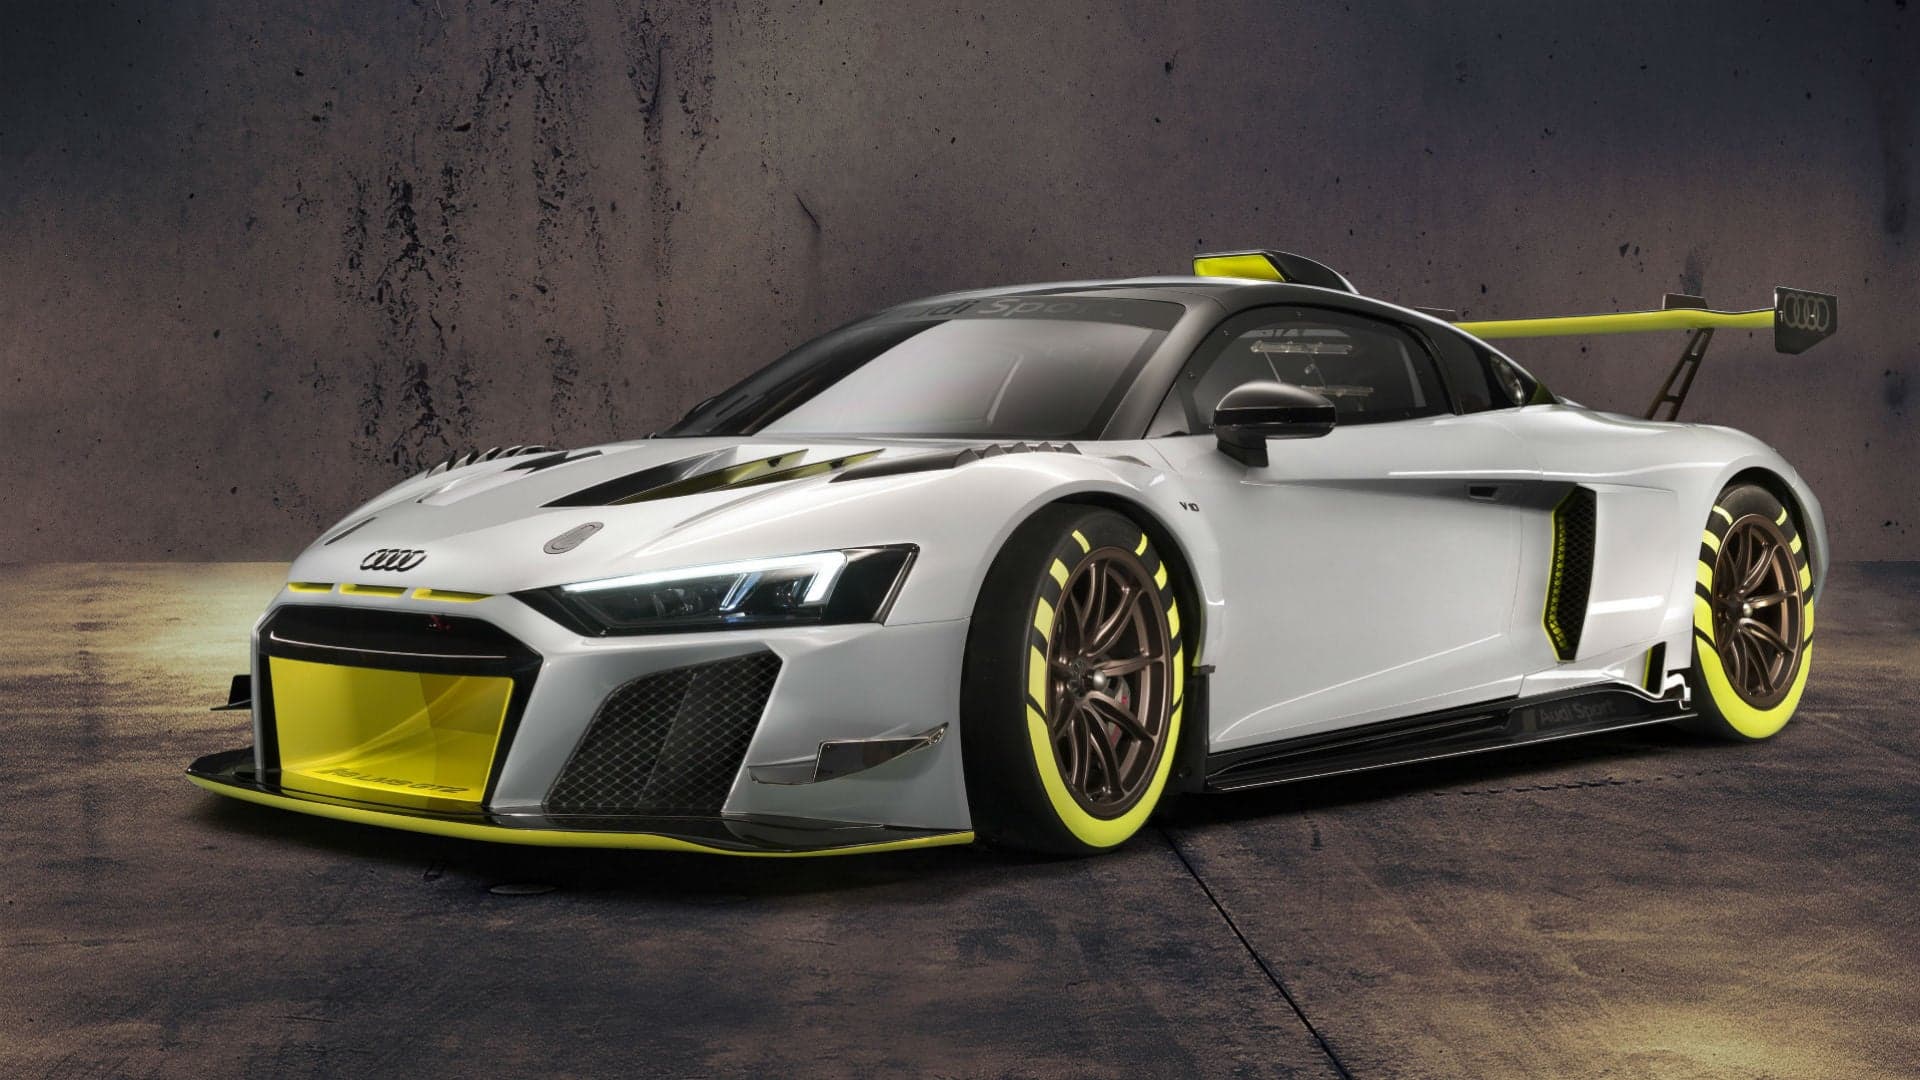 New Audi R8 LMS GT2 Is a 630-HP, Naturally Aspirated Racing Machine